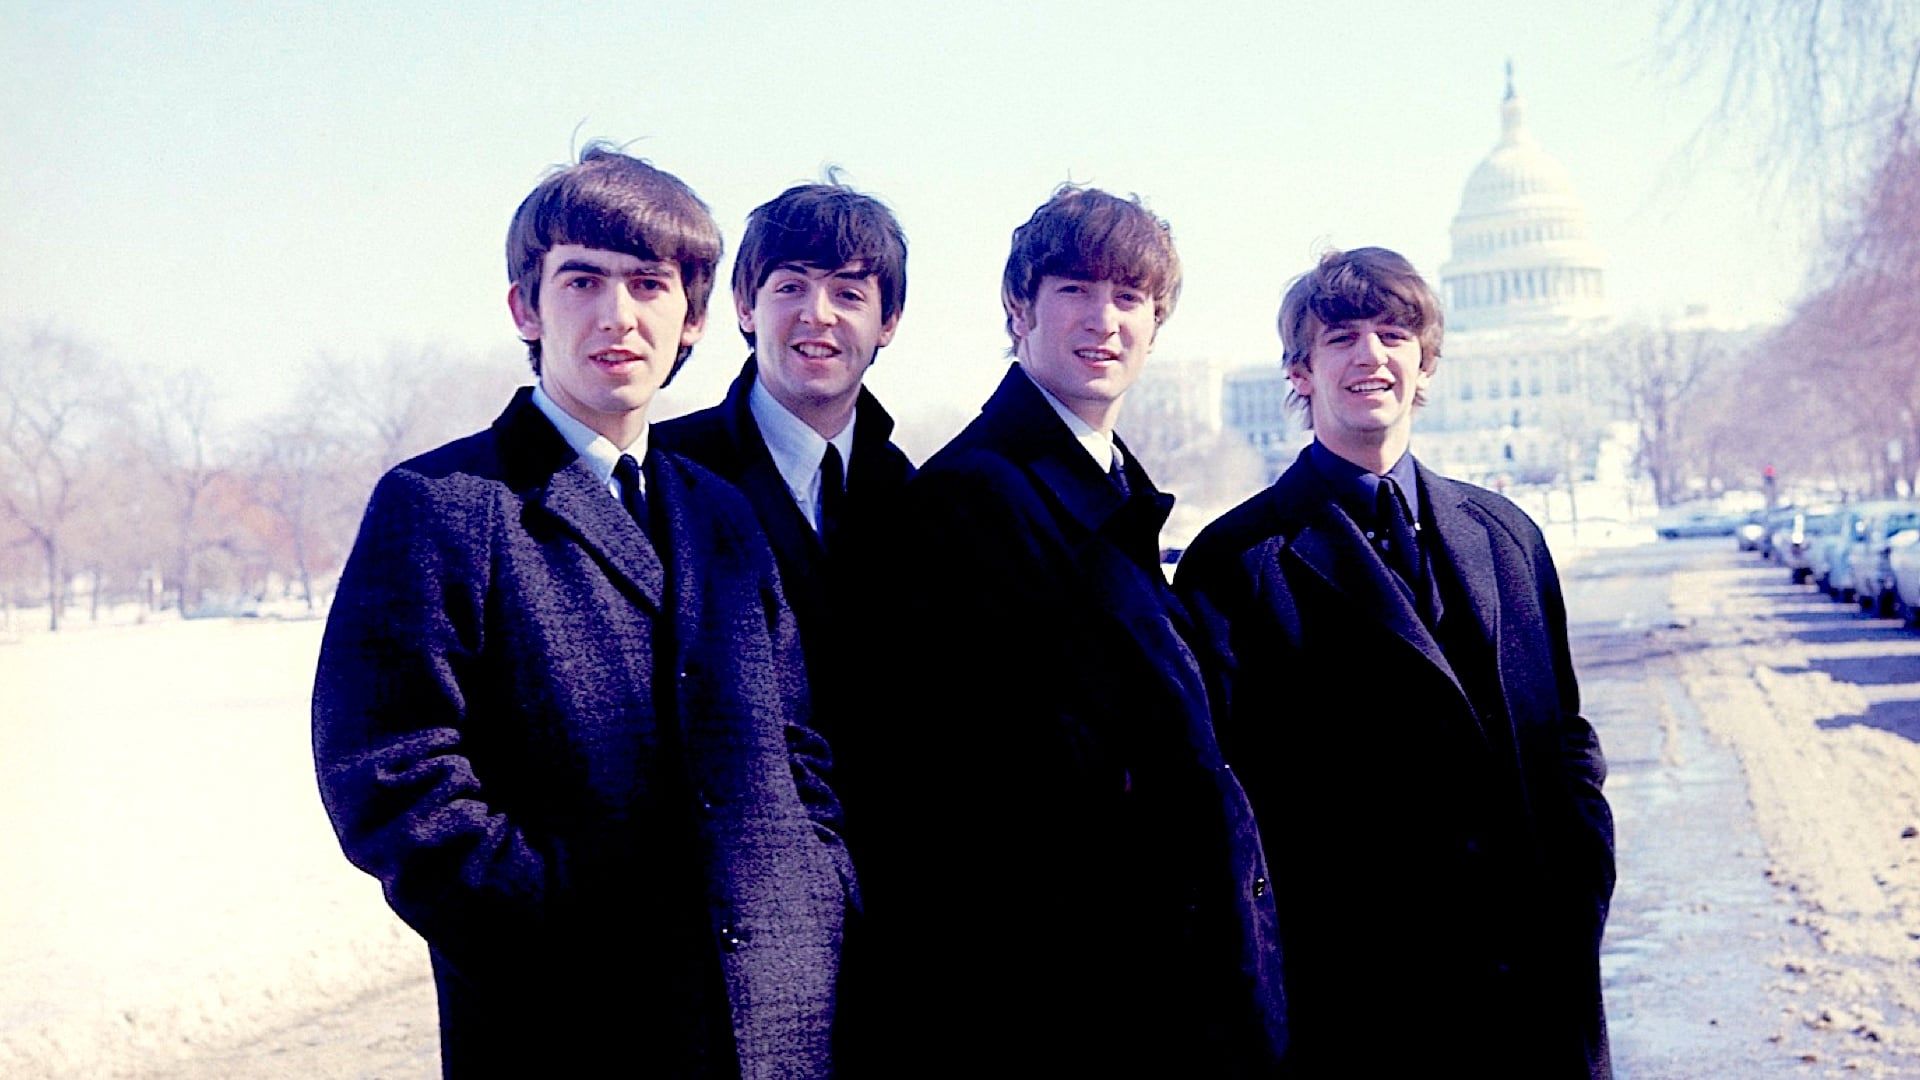 The Compleat Beatles background